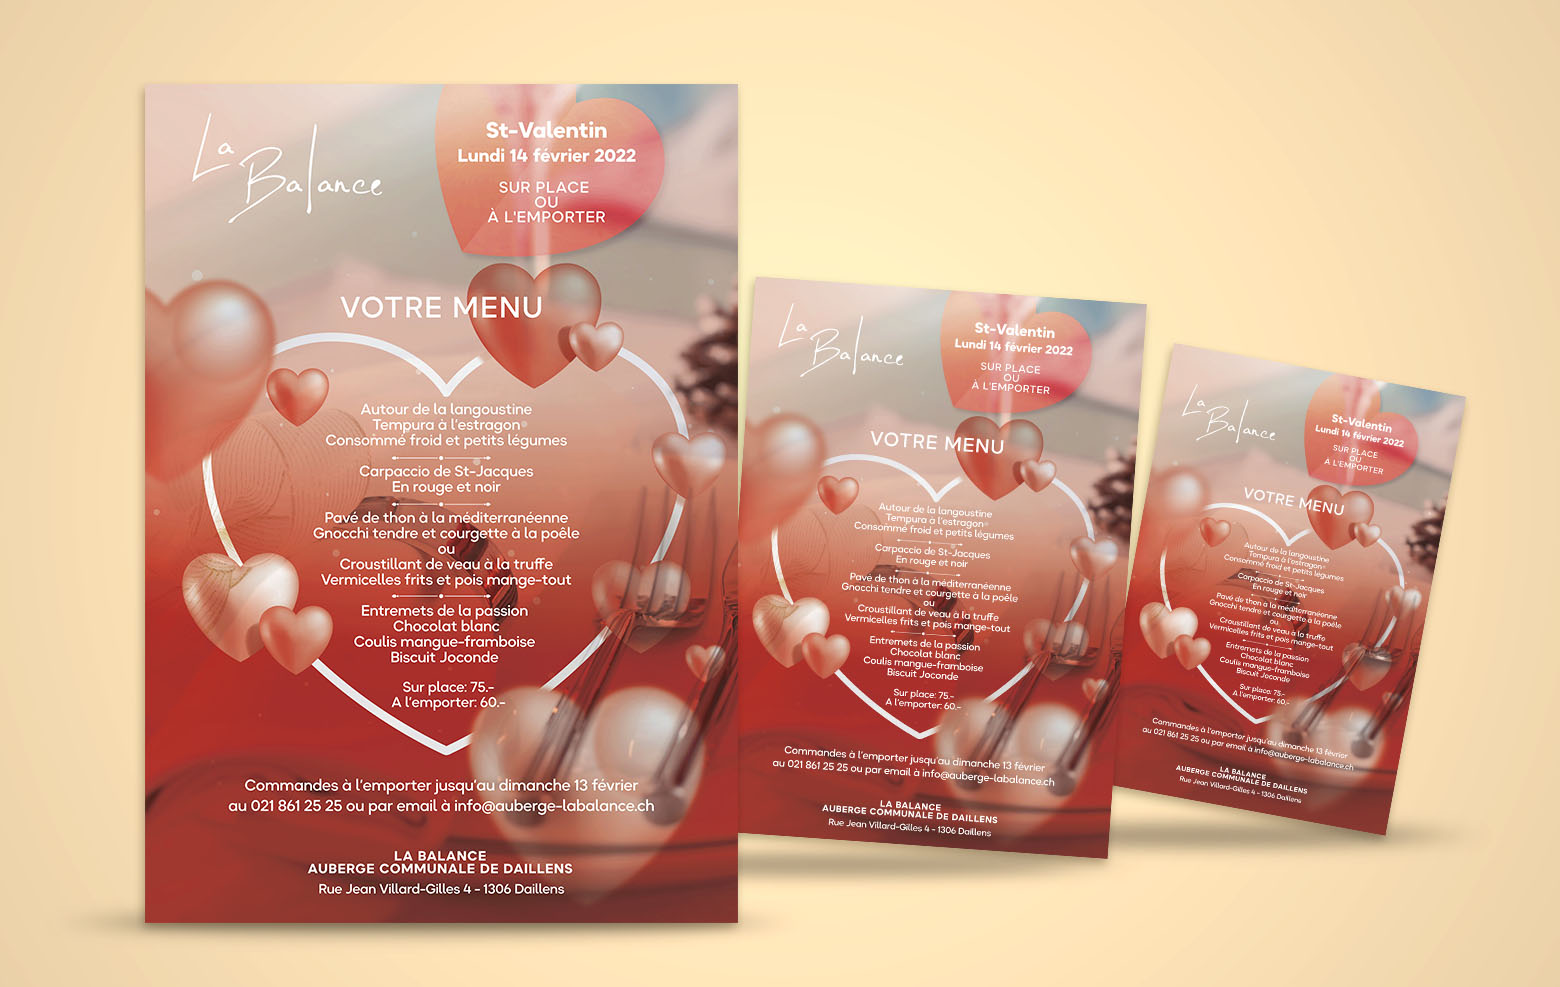 Auberge-flyer-st-valentin-preview-20220129-01